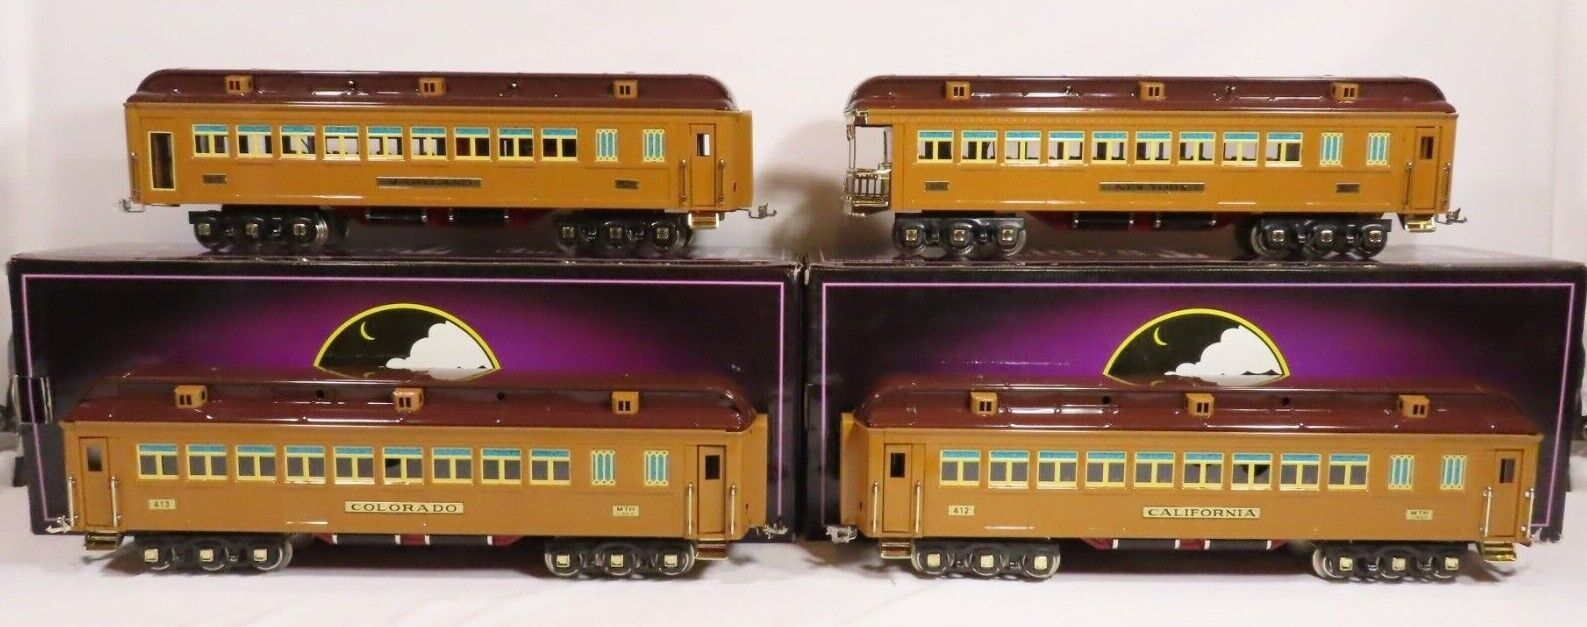 MTH 10-1132-0 408E Standard Gauge State Set Two Tone Brown w/4 Cars LN